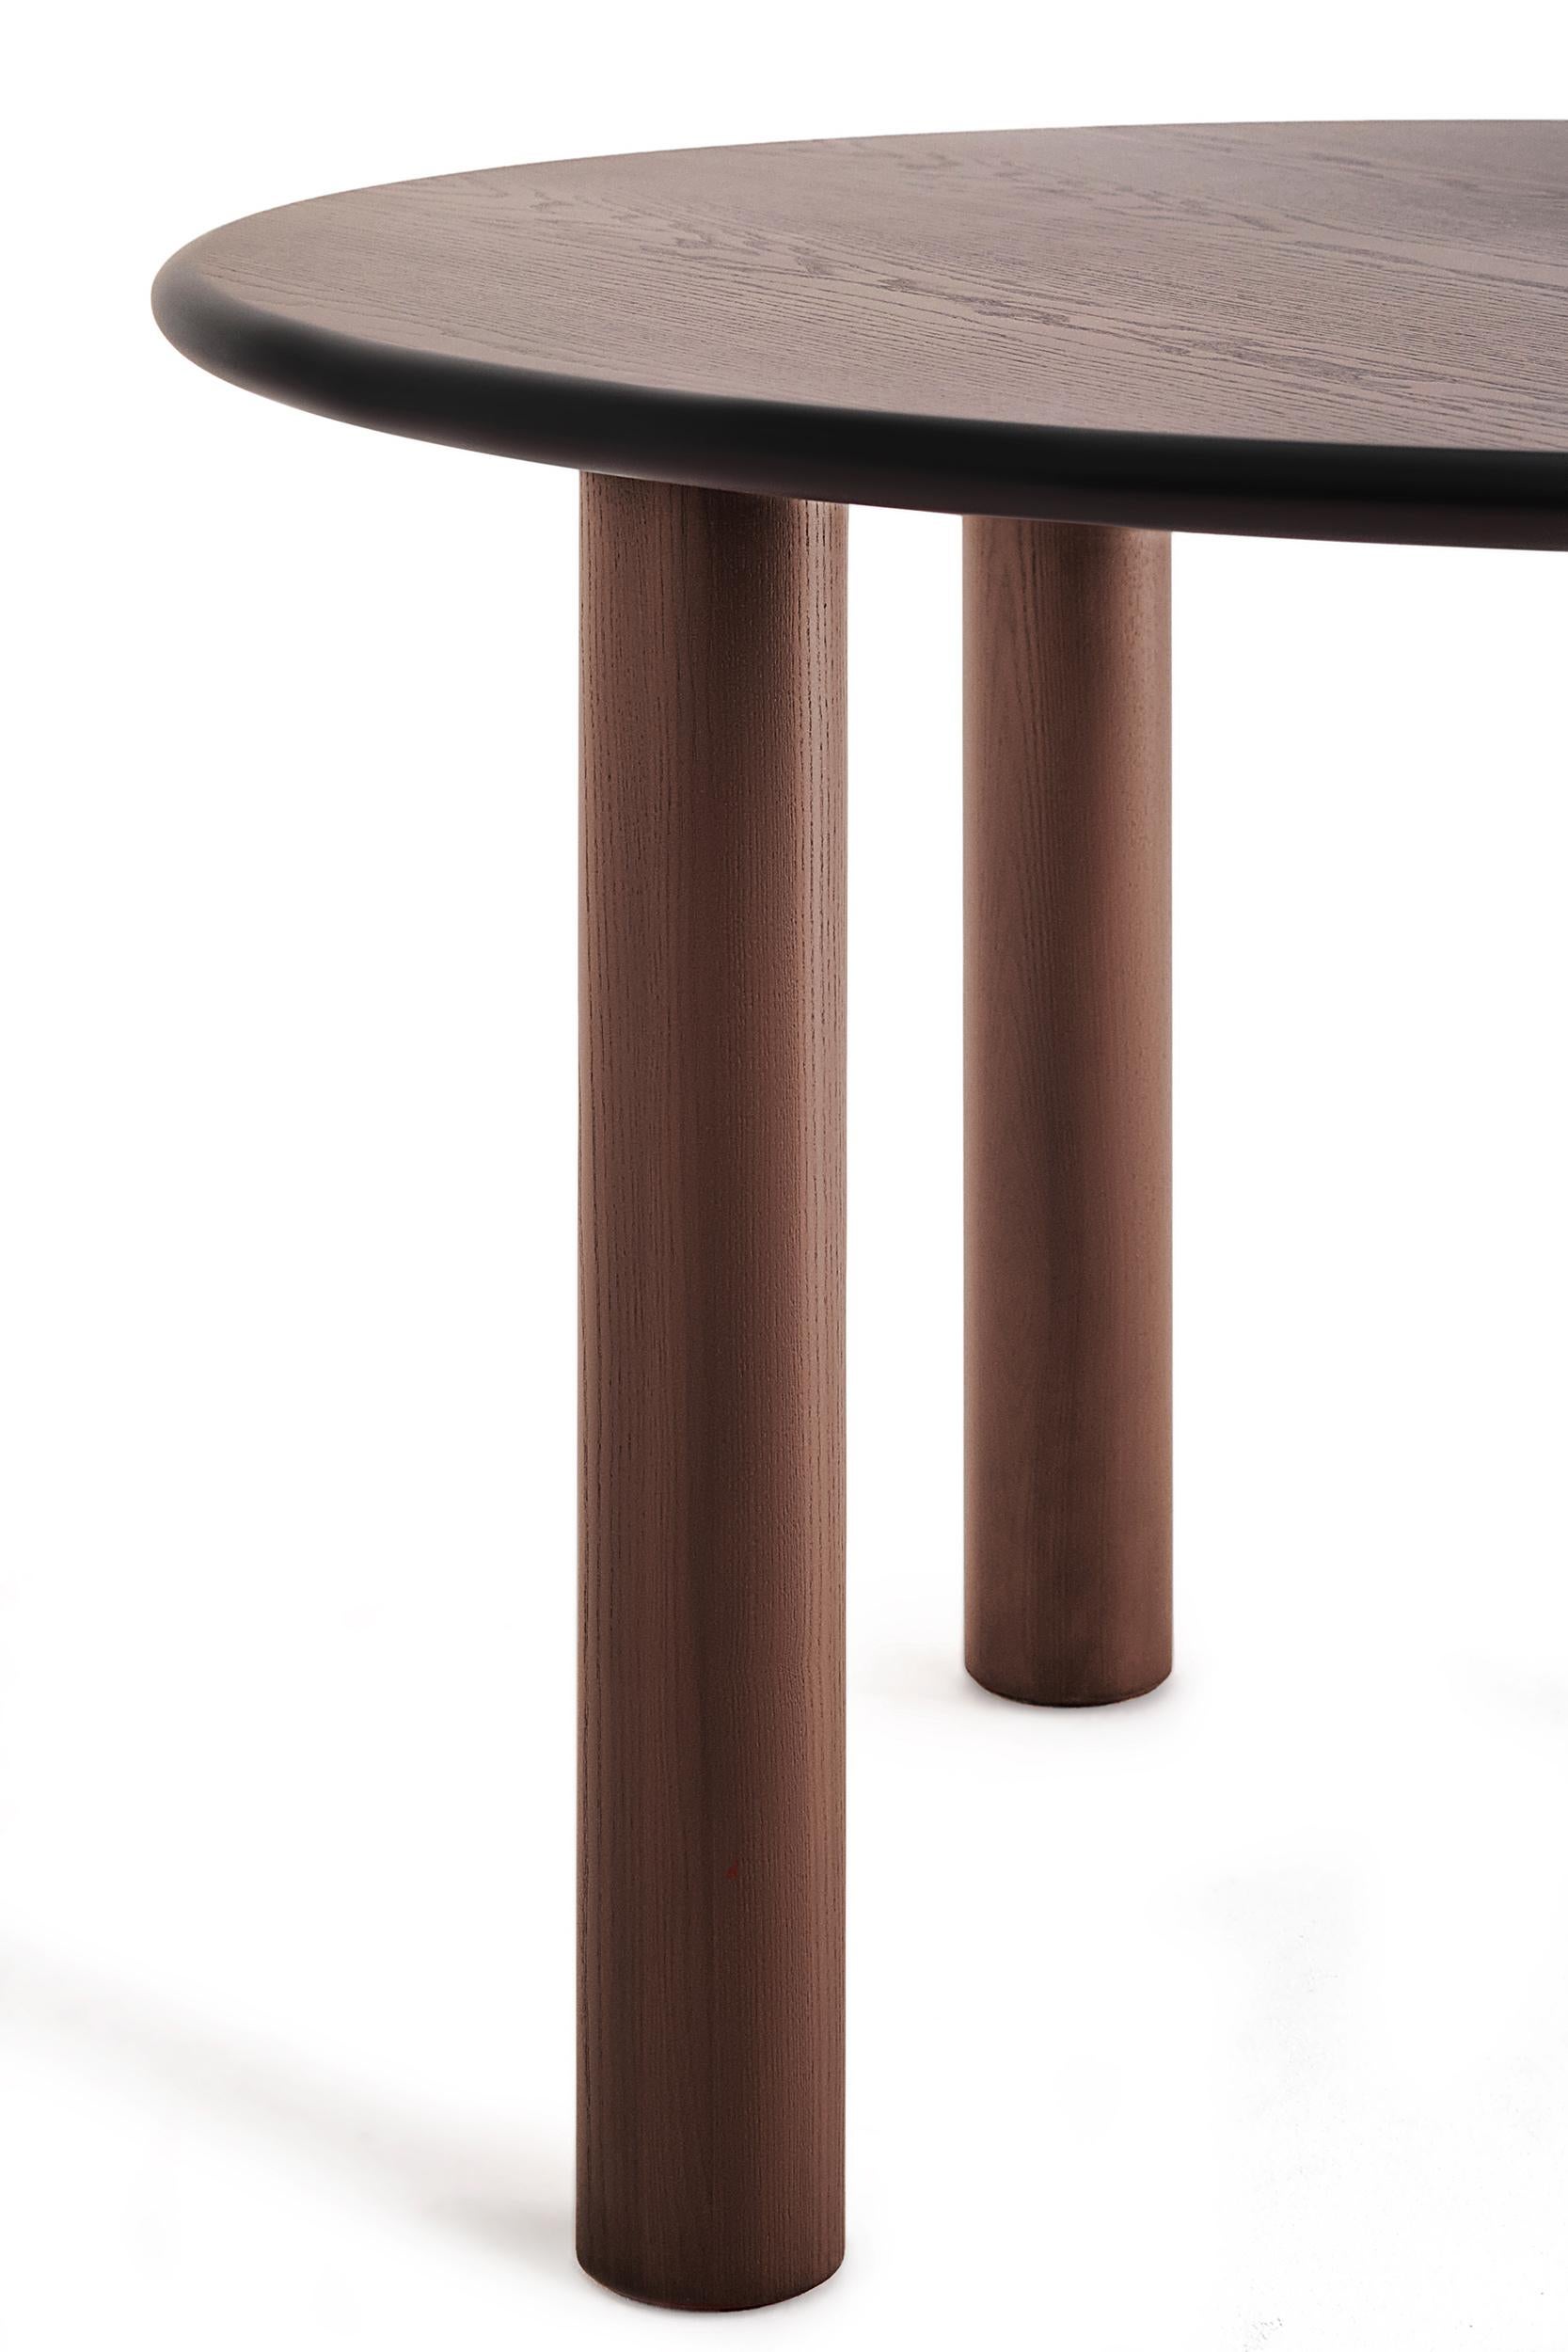 Wood Contemporary Dining Round Table 'Paul' by Noom, Brown Stained, 180 cm For Sale